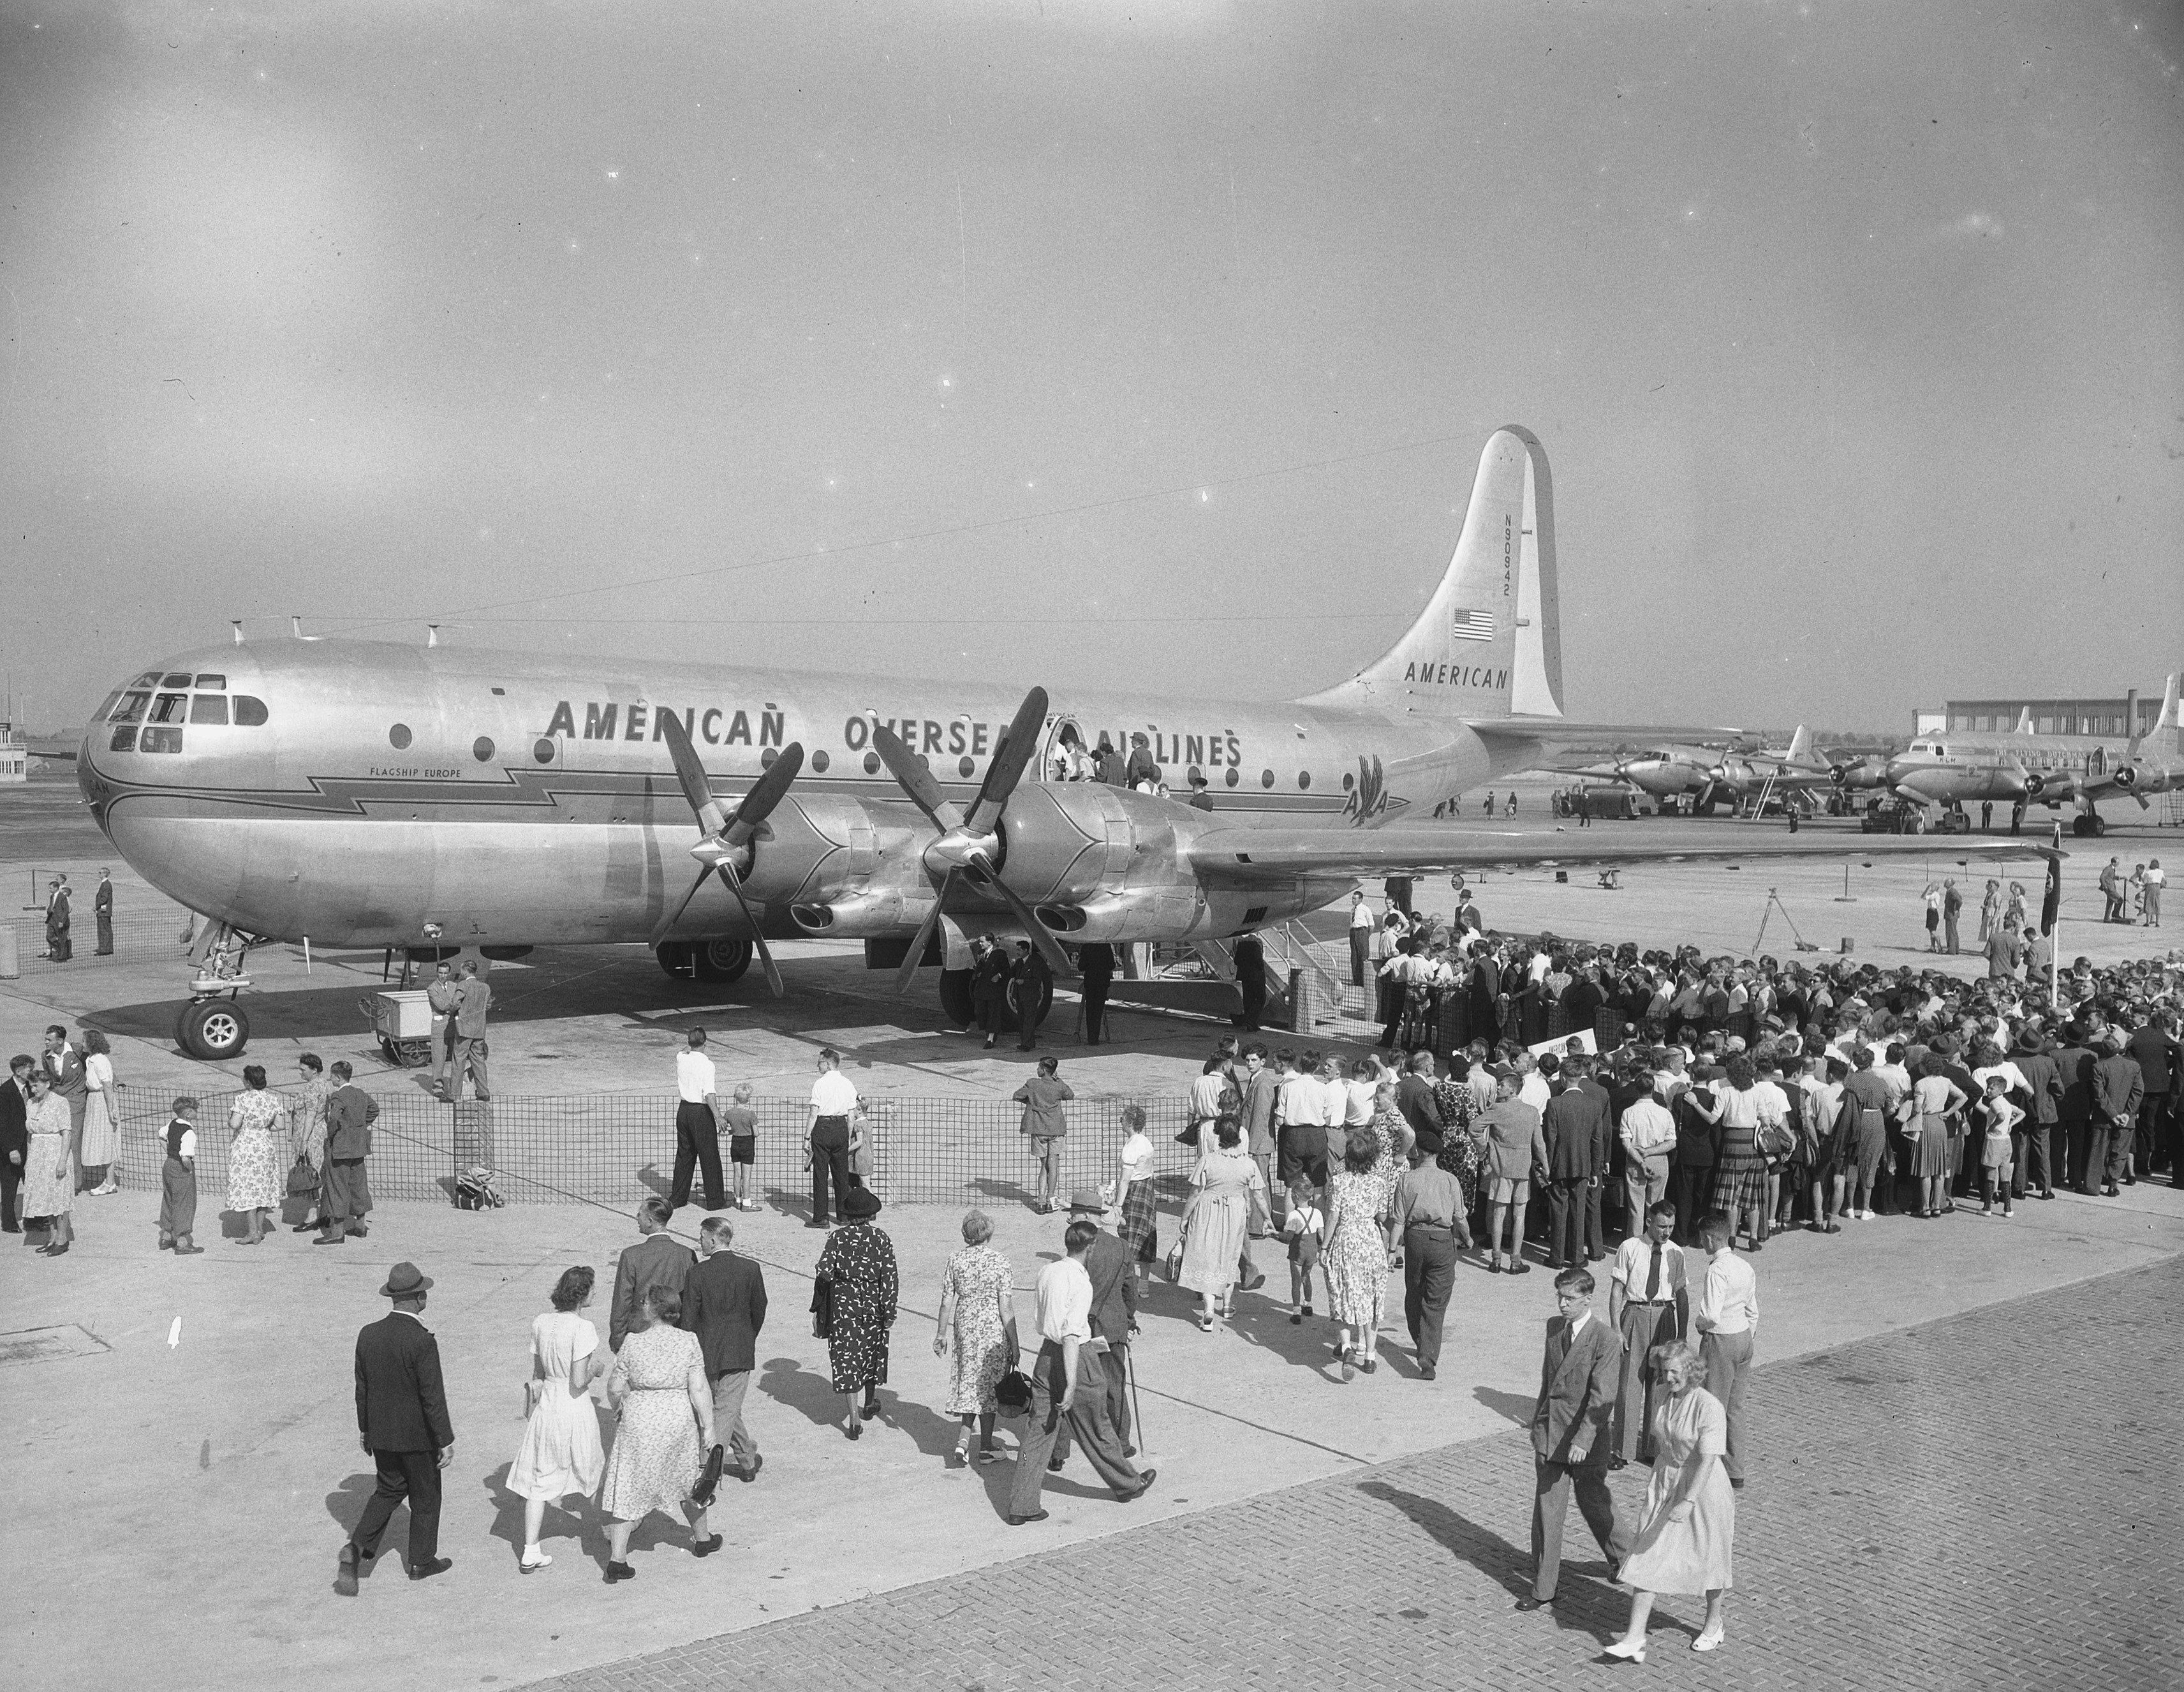 An American Airlines Stratocruiser parked at an airport.